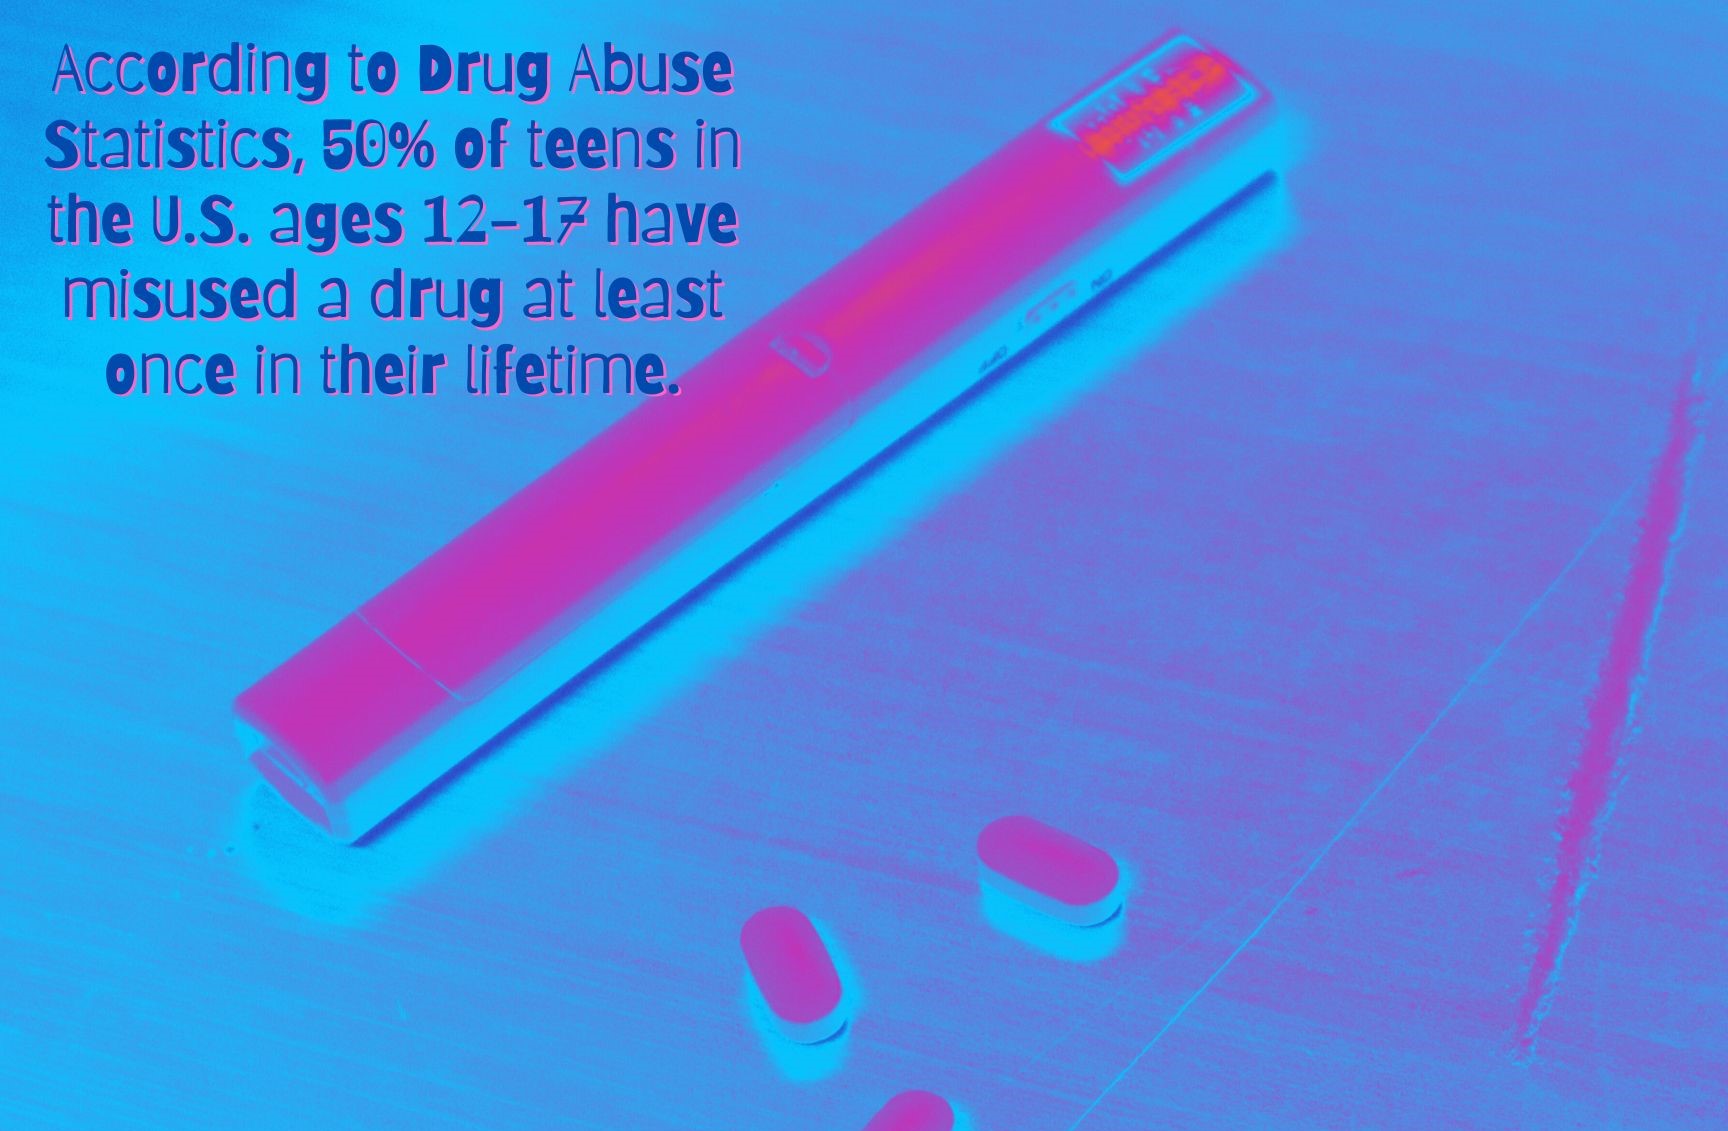 STAGGERING STATS. One half of teens admit to having misused a drug at least once in their lifetime. 